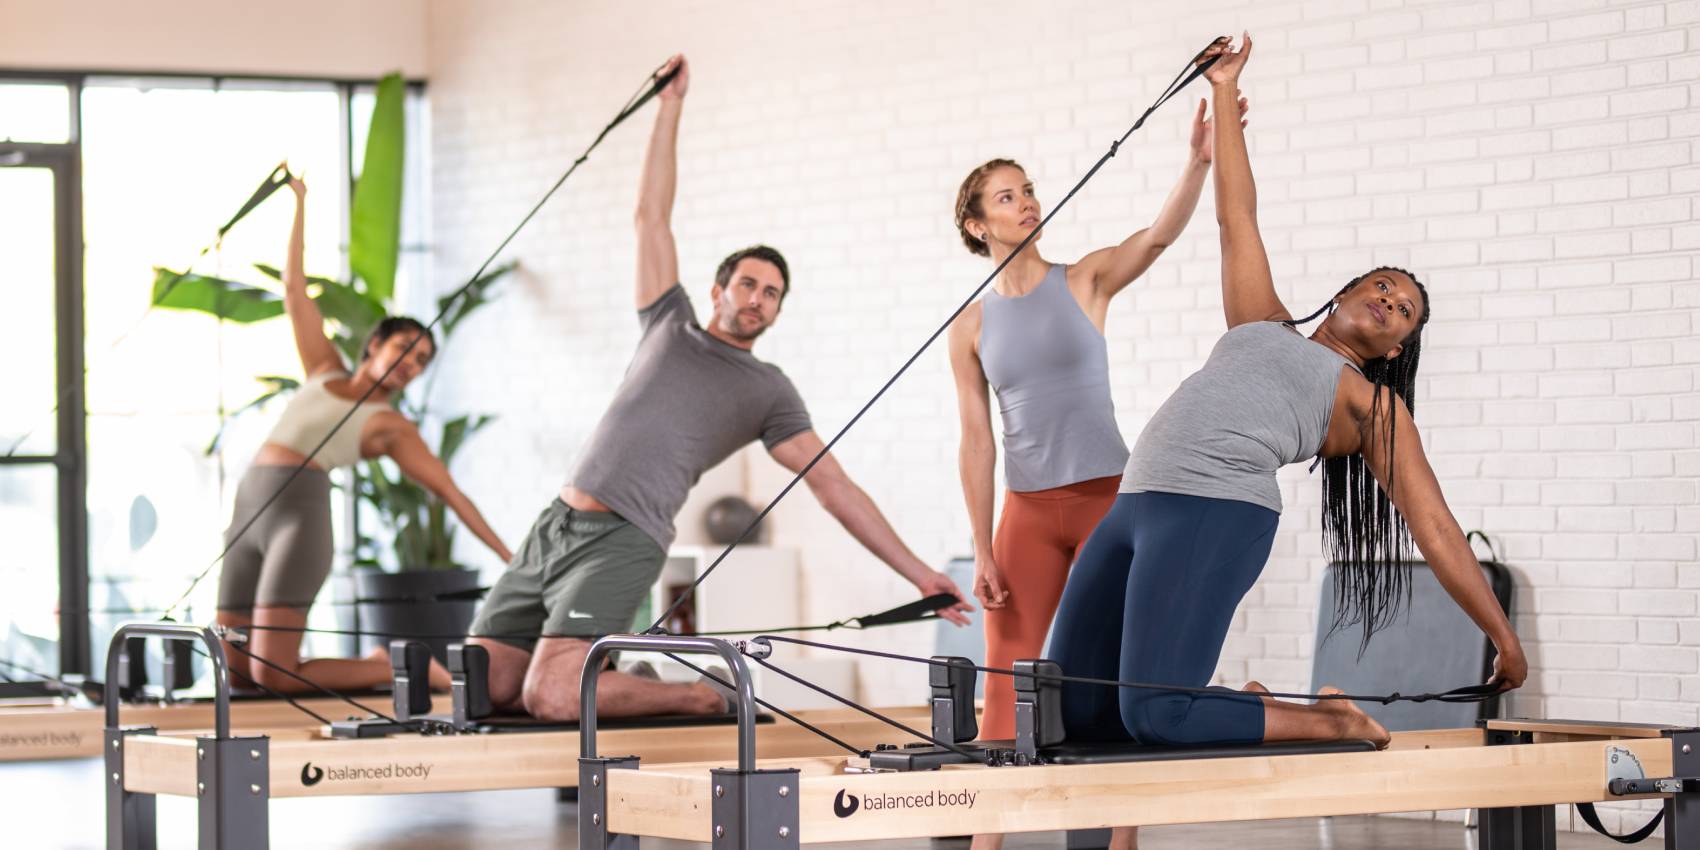 How to Get NPCP Pilates Certification